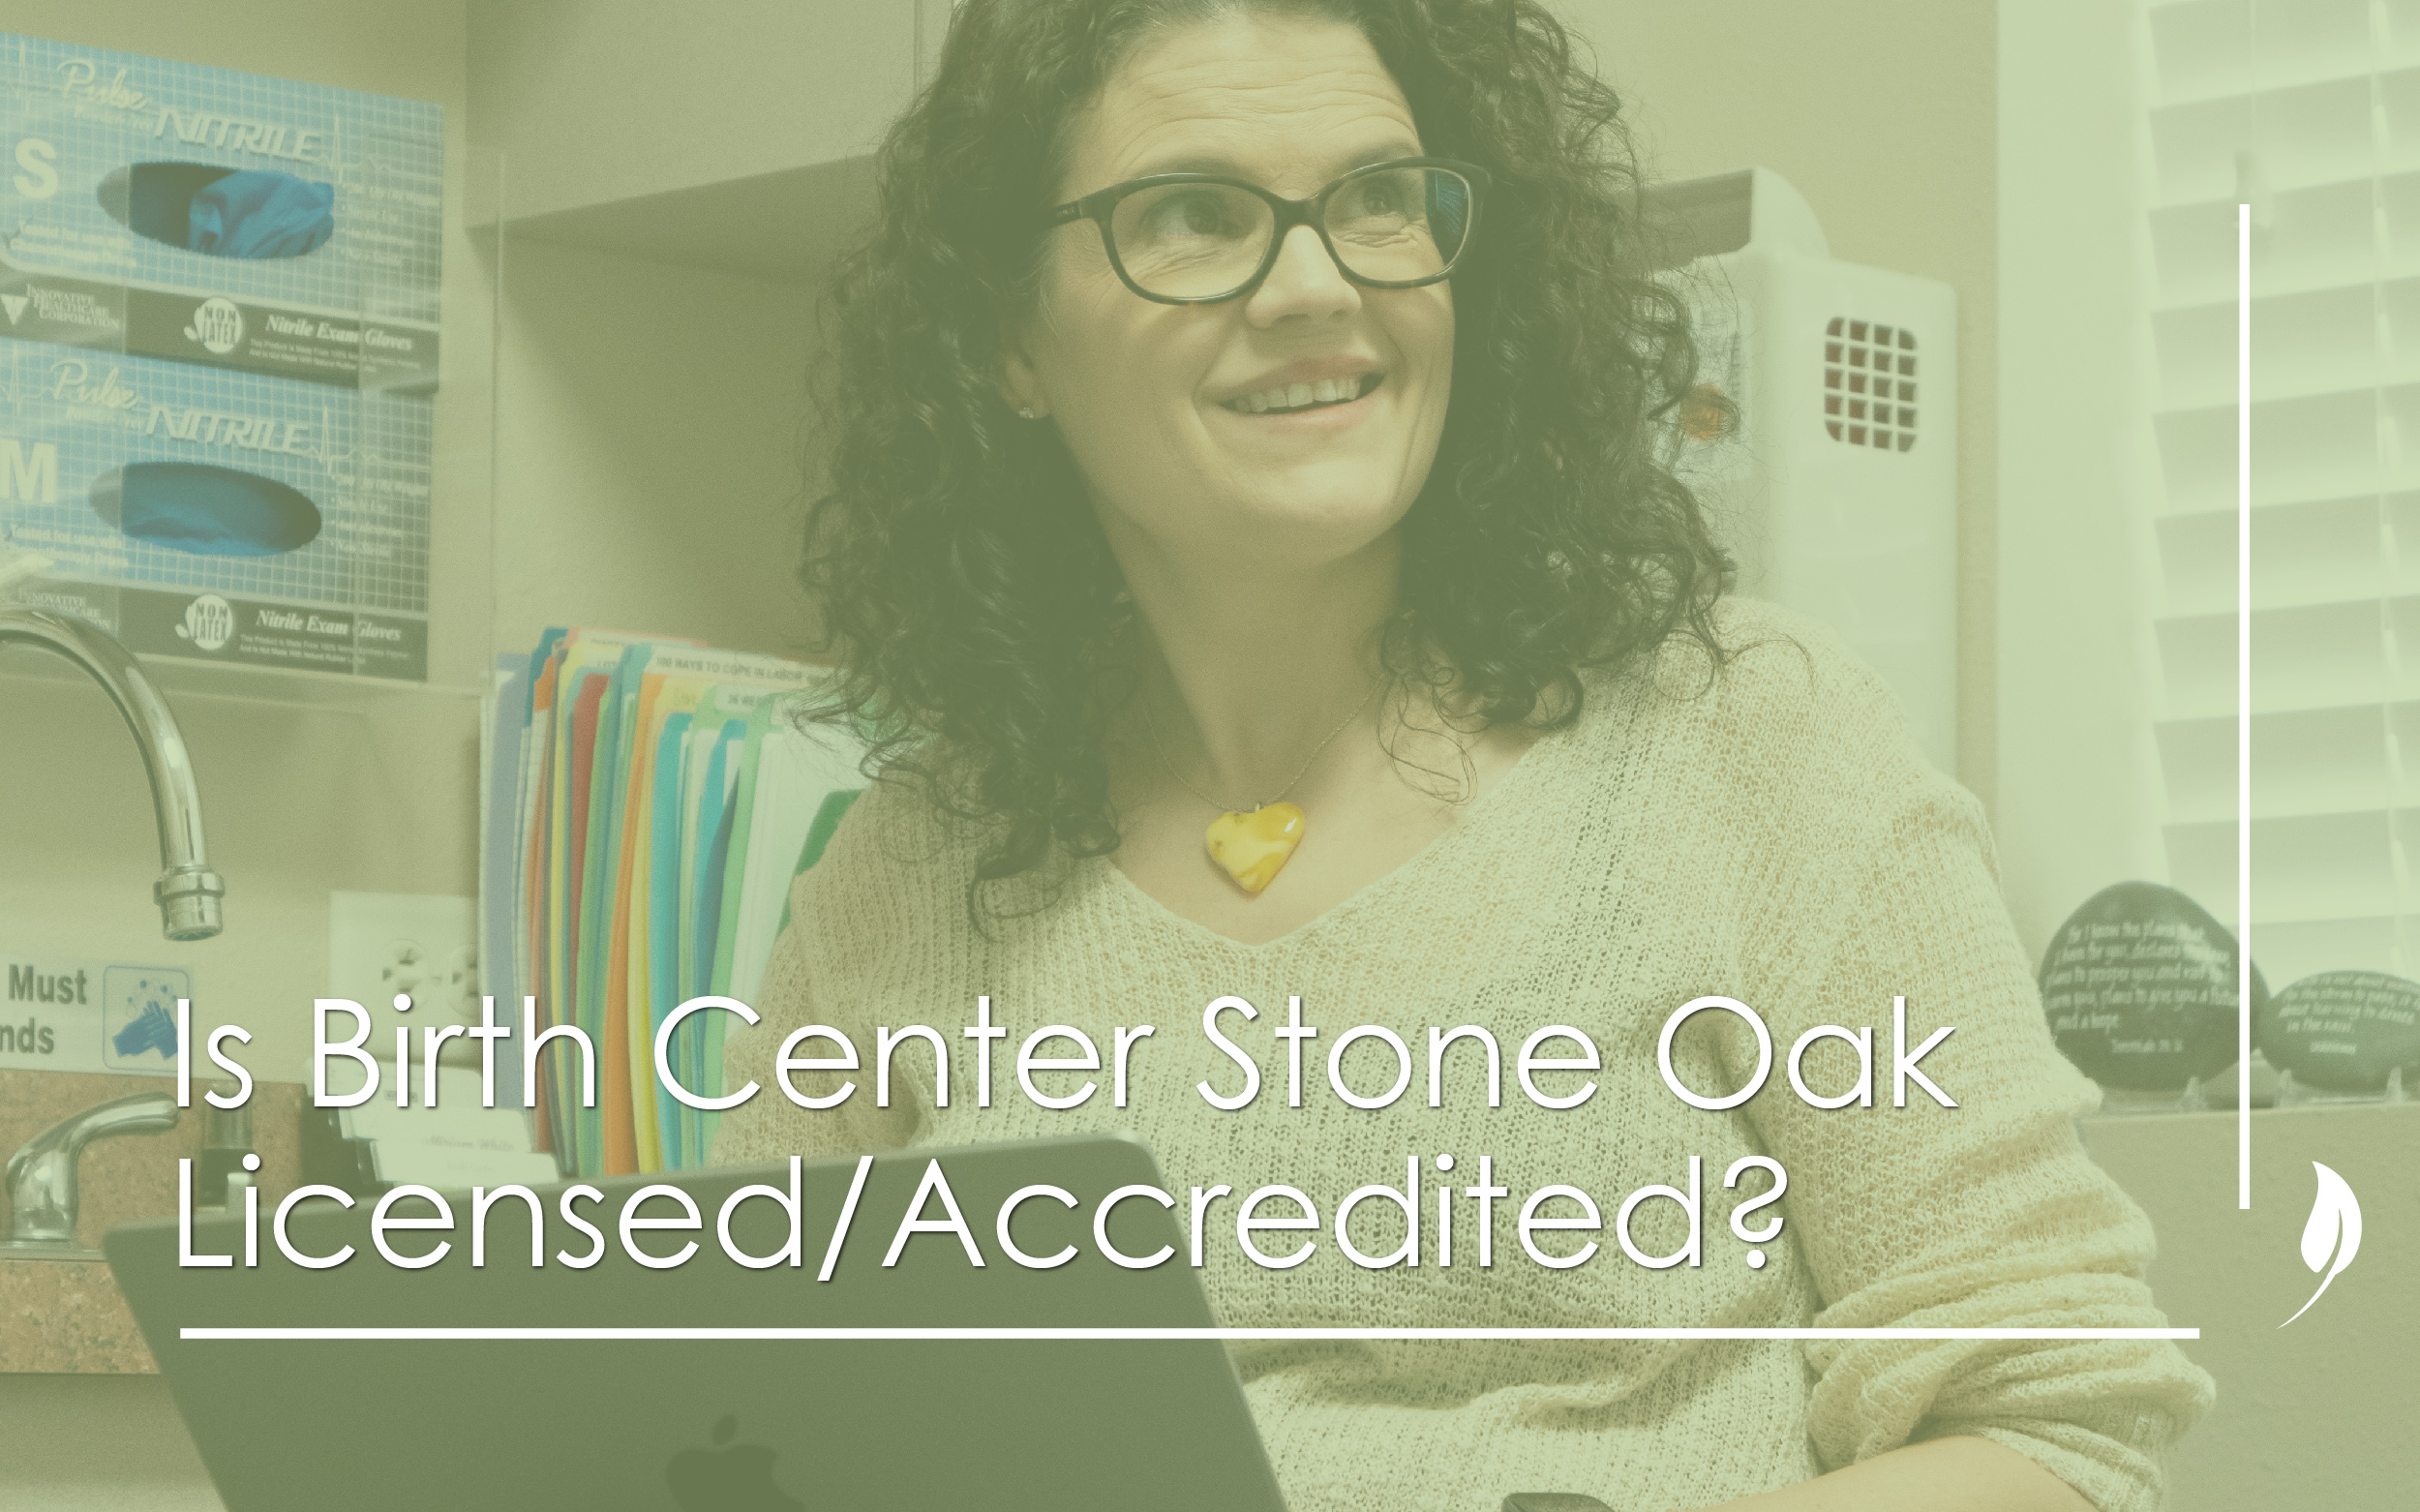 Is Birth Center Stone Oak Licensed/Accredited?